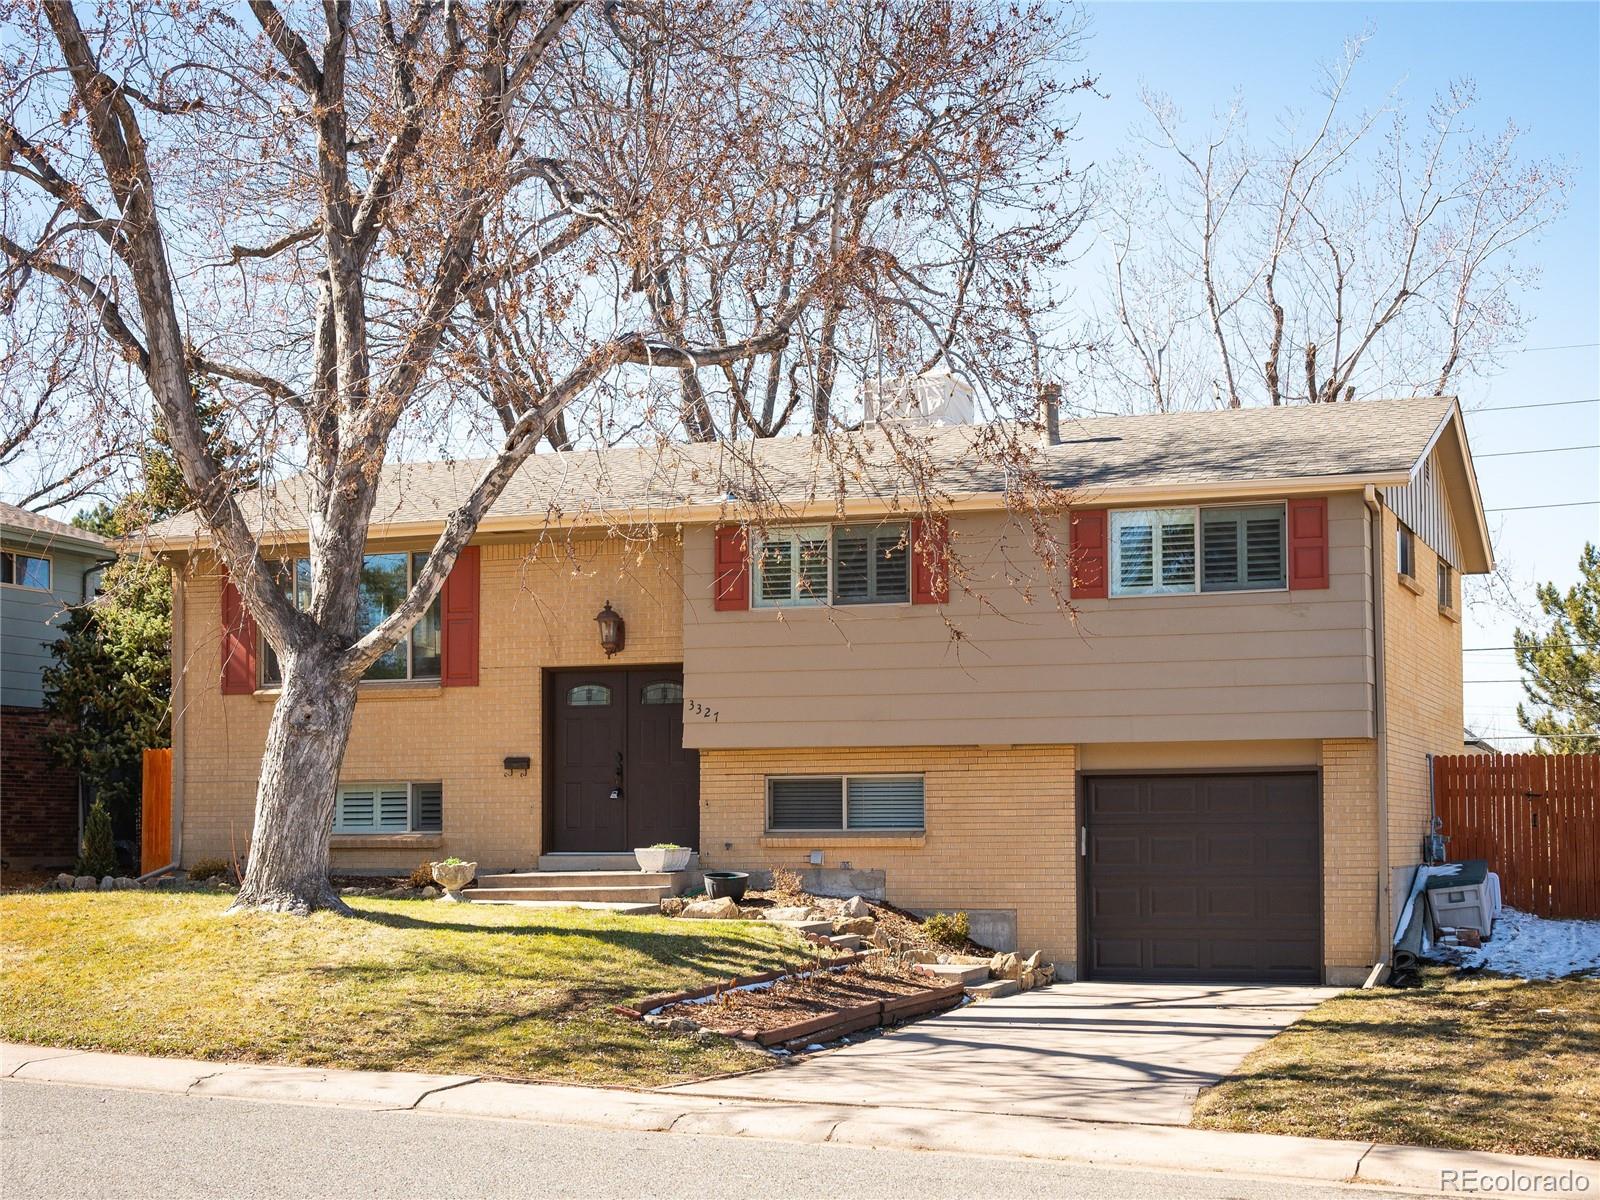 Report Image for 3327 S Ulster Court,Denver, Colorado